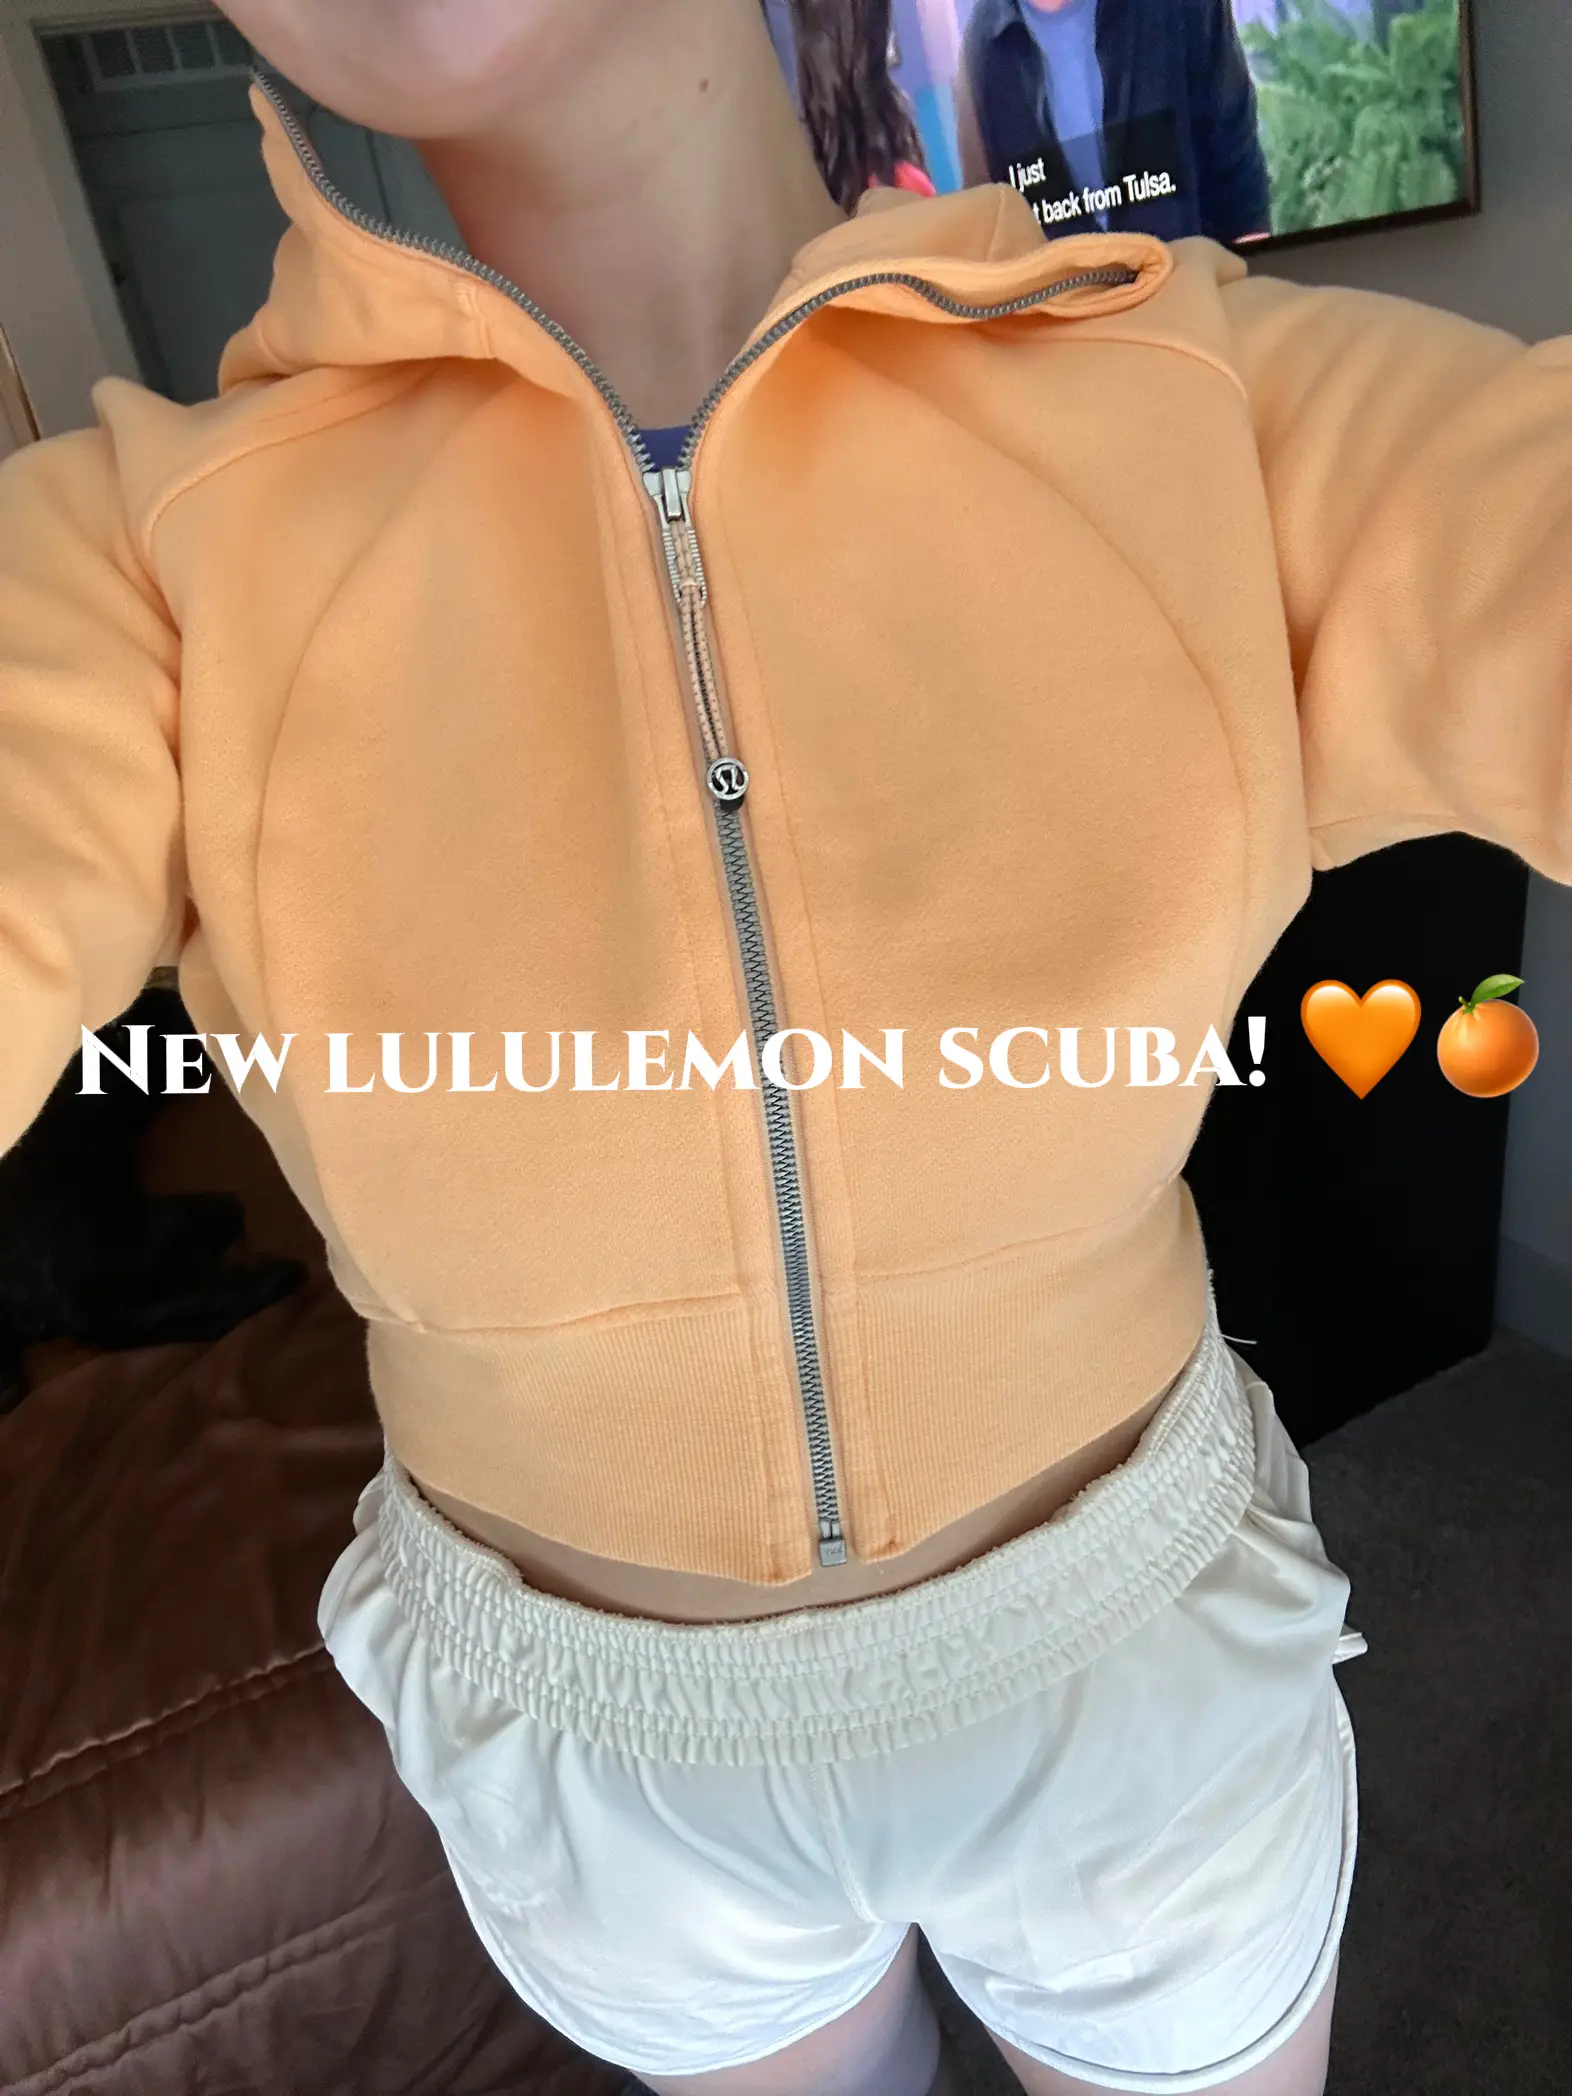 New lululemon scuba! 🍊🧡😍🍋, Gallery posted by Izzy